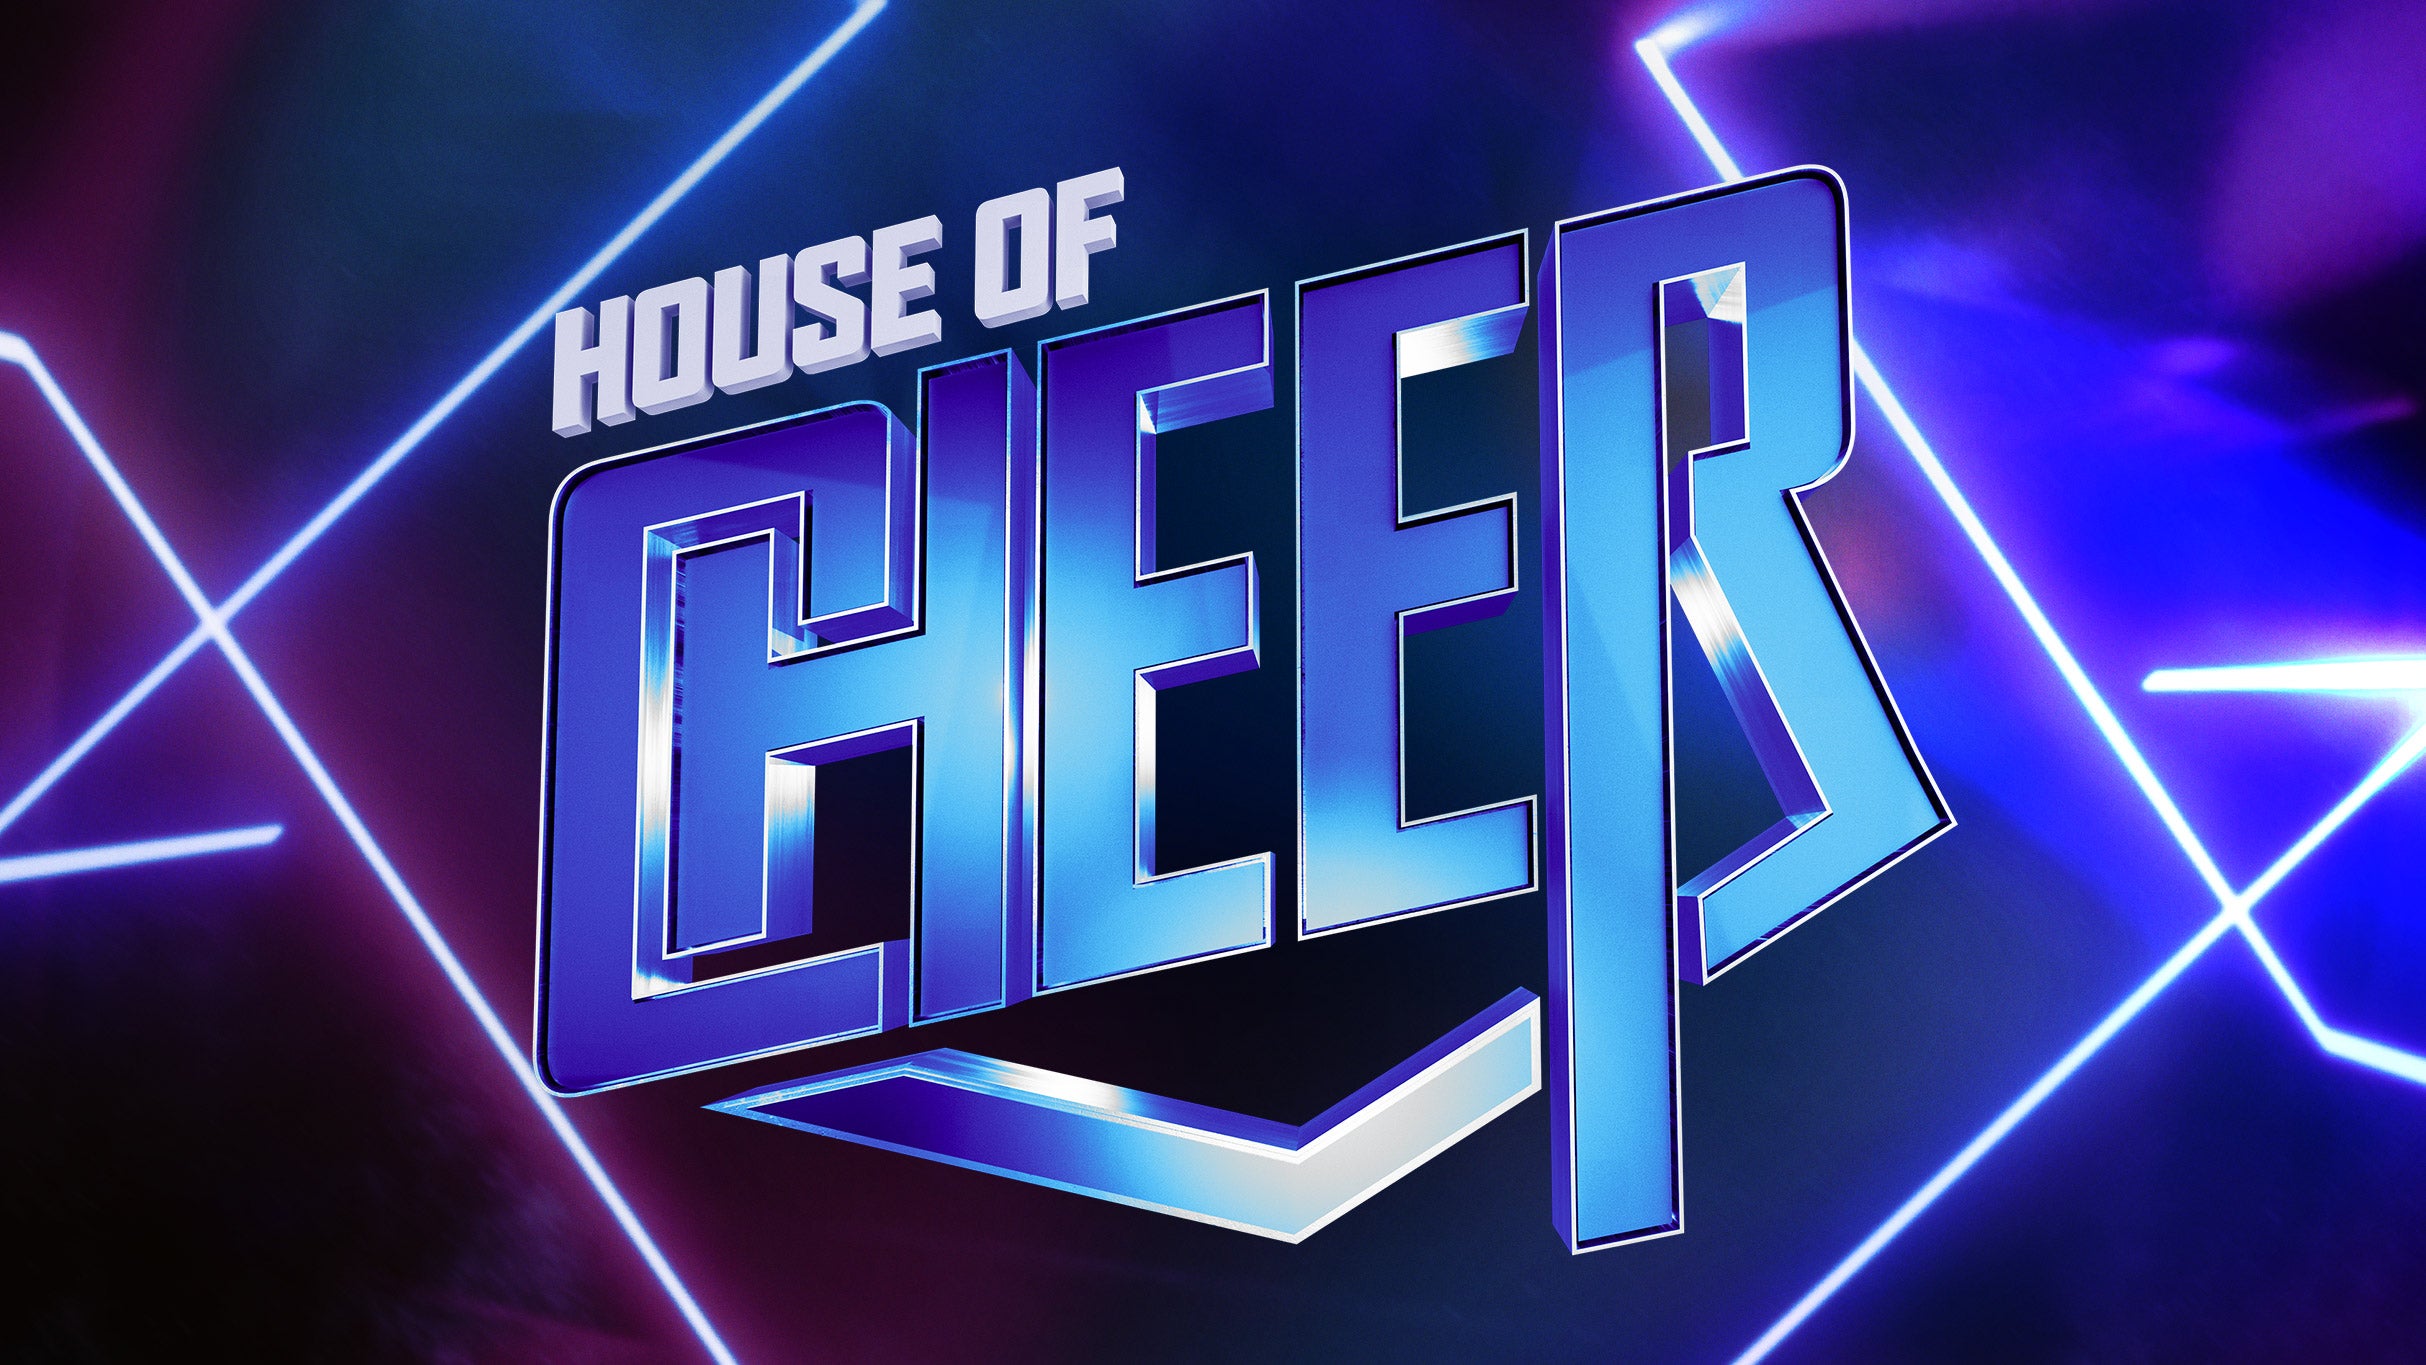 House of Cheer: The Level Up Tour 2023 presale code for show tickets in Detroit, MI (Fox Theatre Detroit)